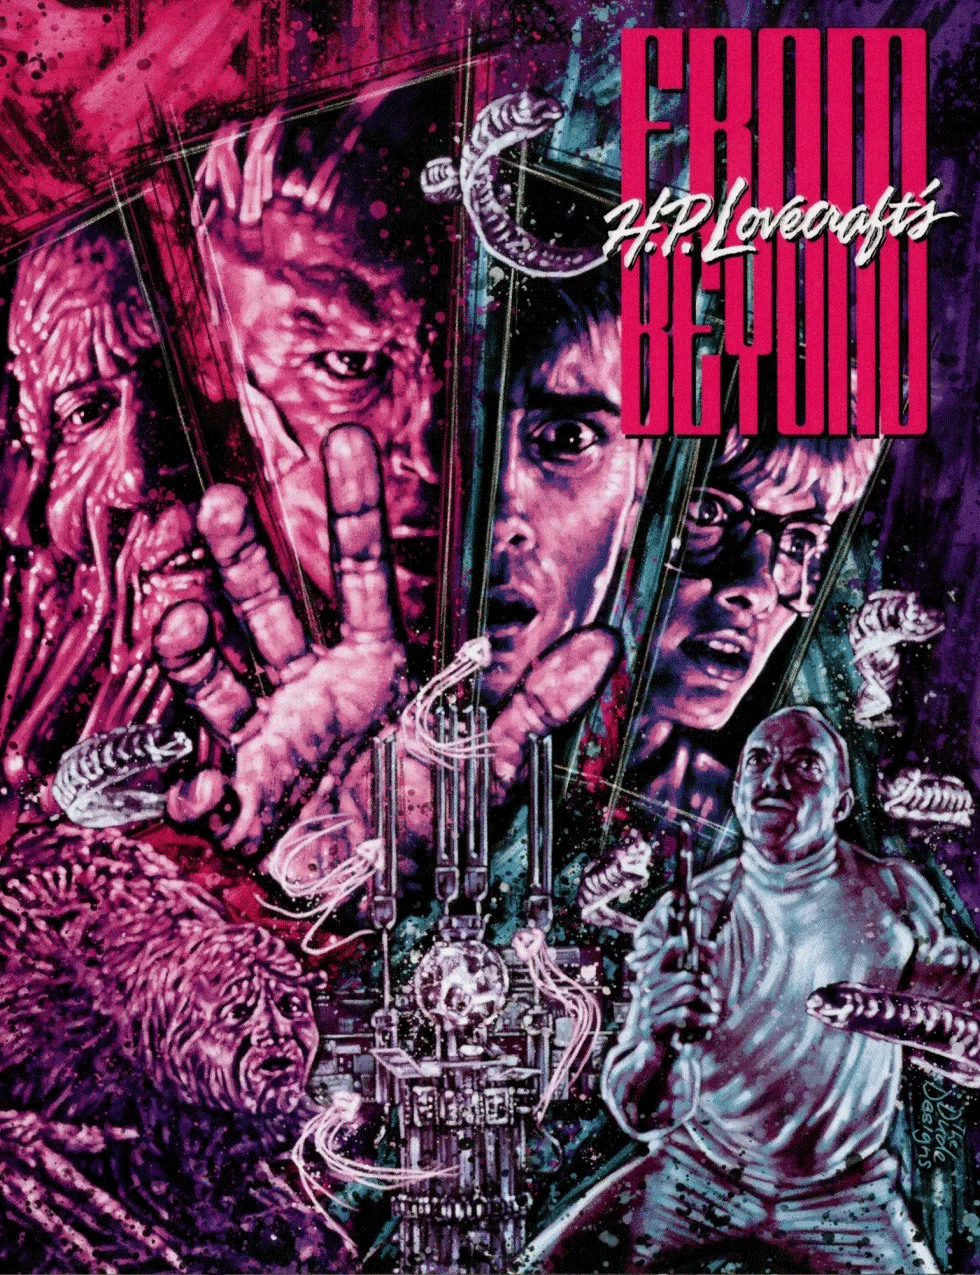 FROM BEYOND - 4K ULTRA HD / BLU-RAY (LIMITED EDITION)